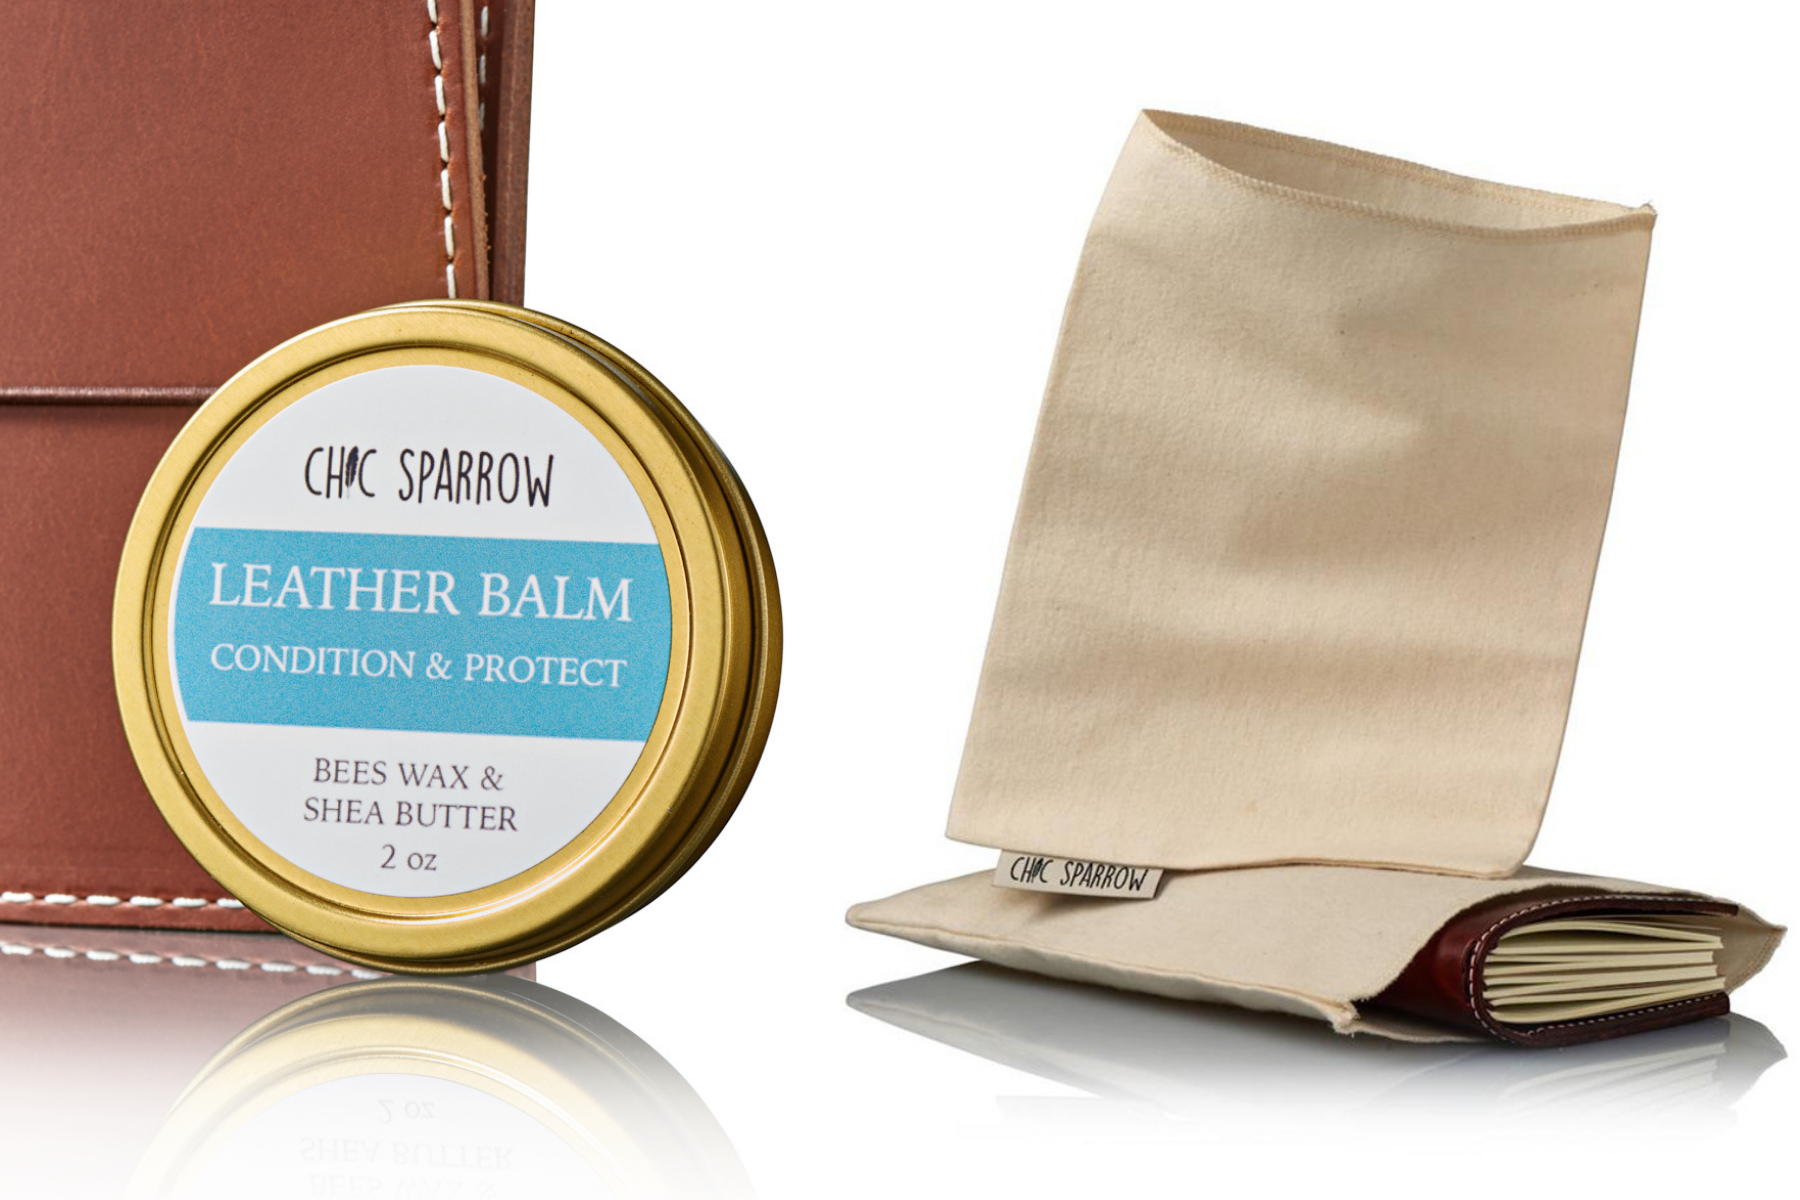 Chic Sparrow Leather Balm and Cloth Dust Bag